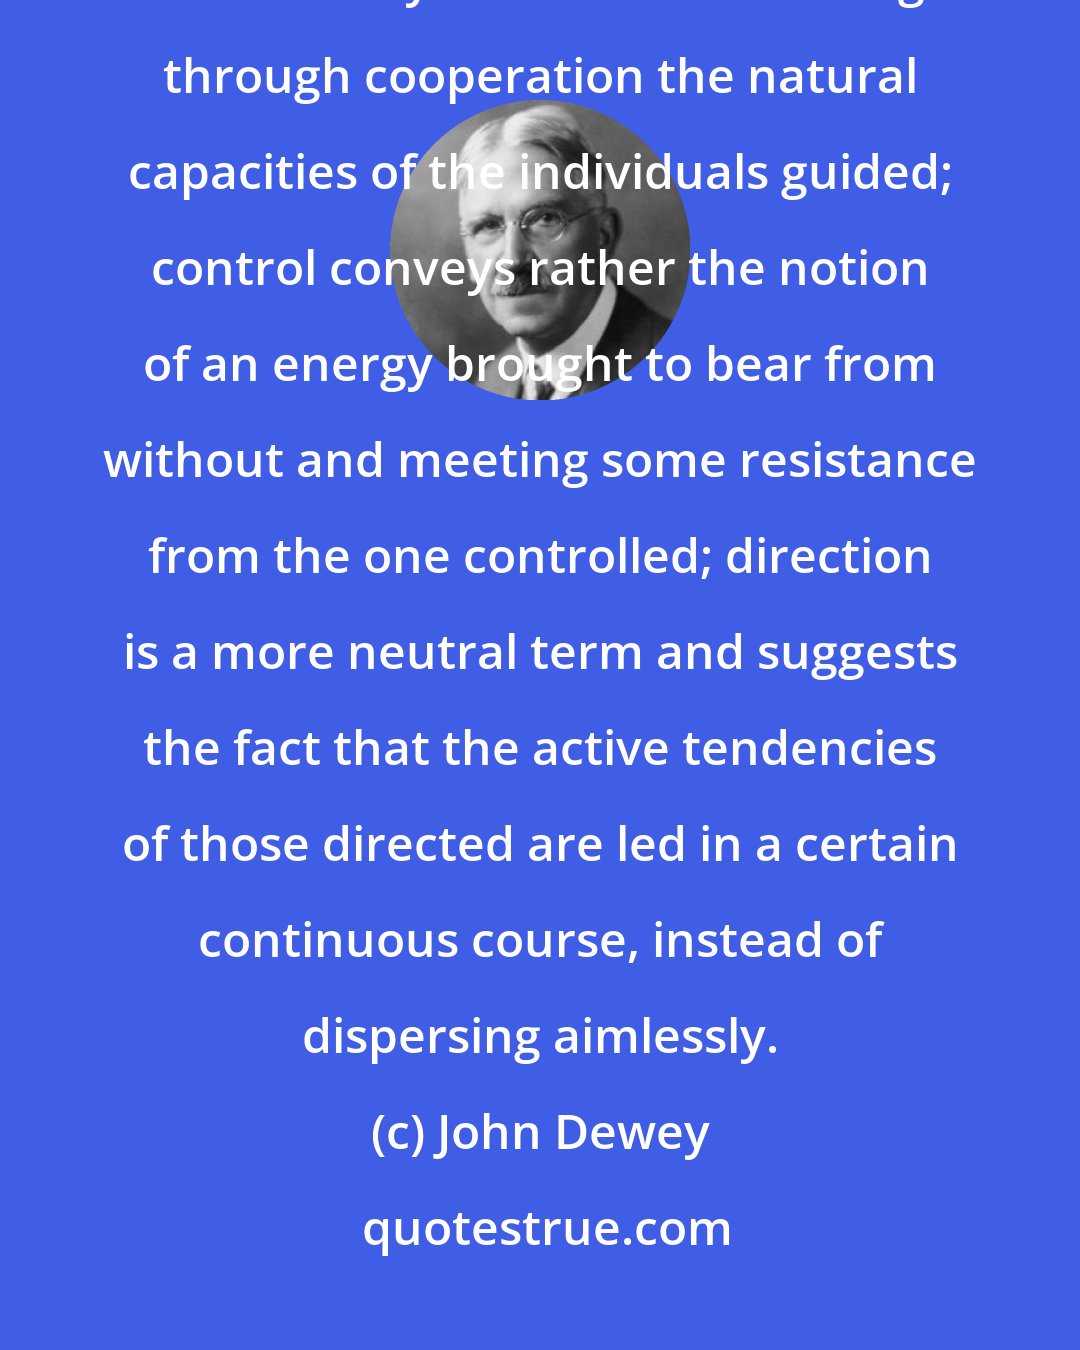 John Dewey: Of these three words, direction, control, and guidance, the last best conveys the idea of assisting through cooperation the natural capacities of the individuals guided; control conveys rather the notion of an energy brought to bear from without and meeting some resistance from the one controlled; direction is a more neutral term and suggests the fact that the active tendencies of those directed are led in a certain continuous course, instead of dispersing aimlessly.